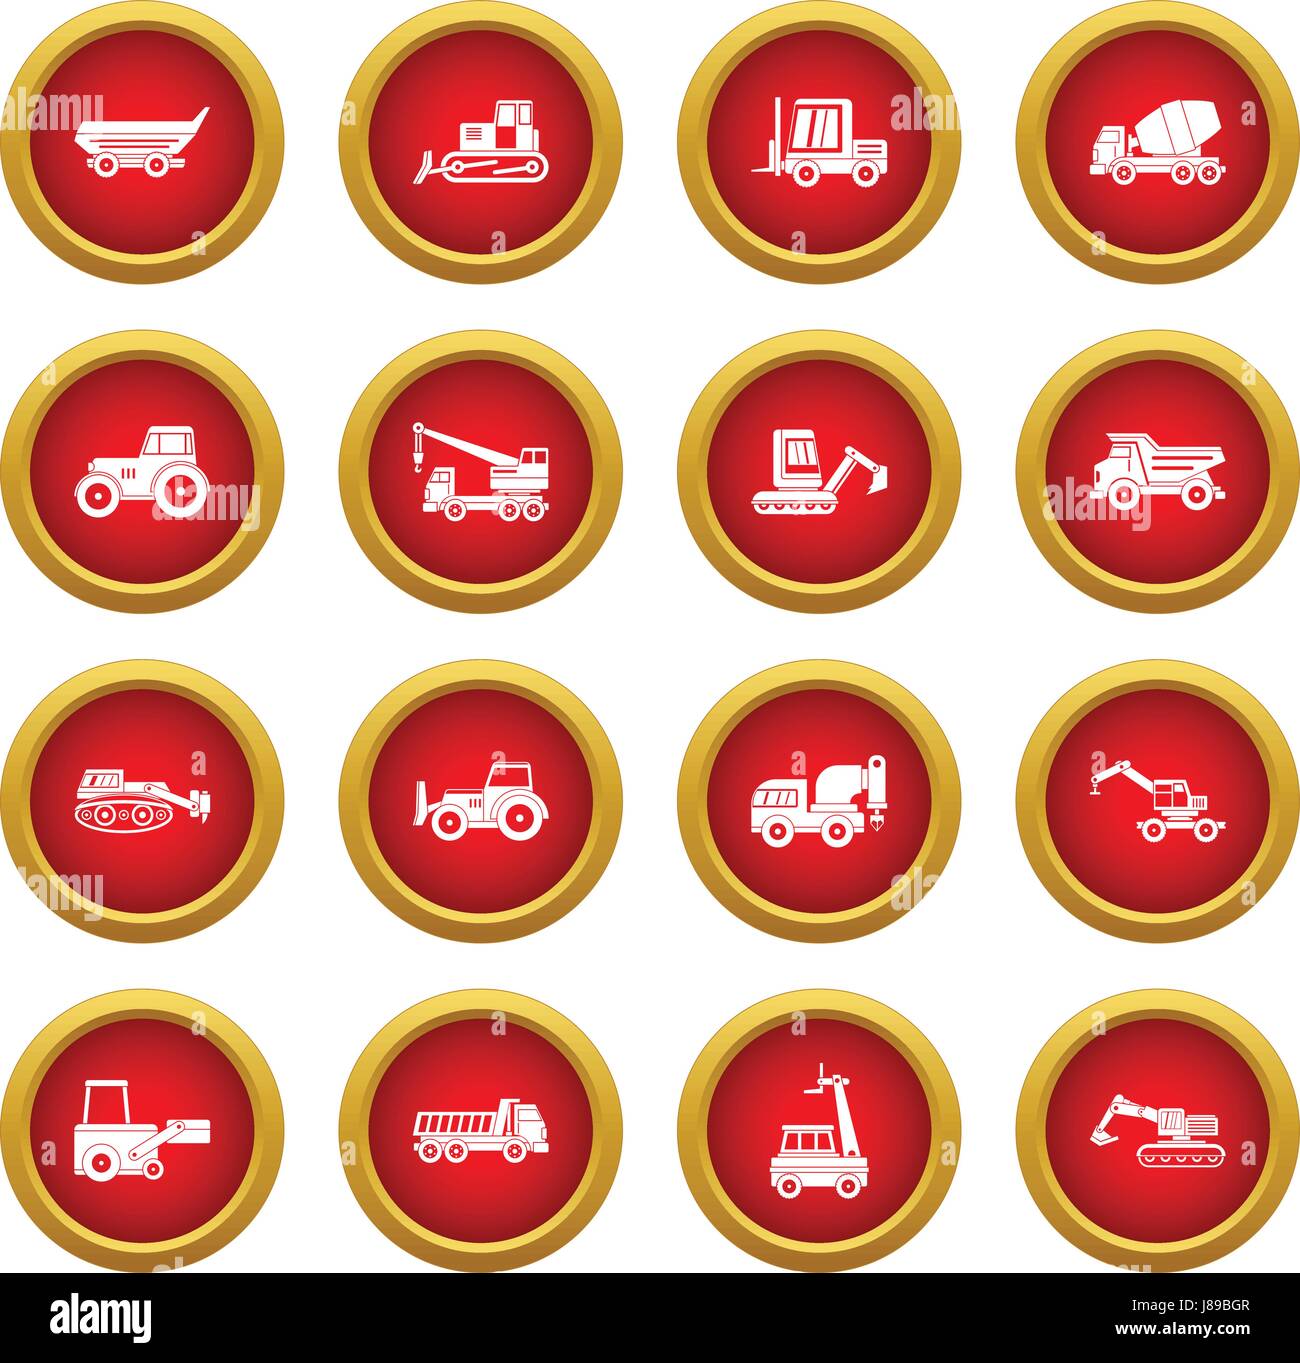 Building vehicles icon red circle set Stock Vector